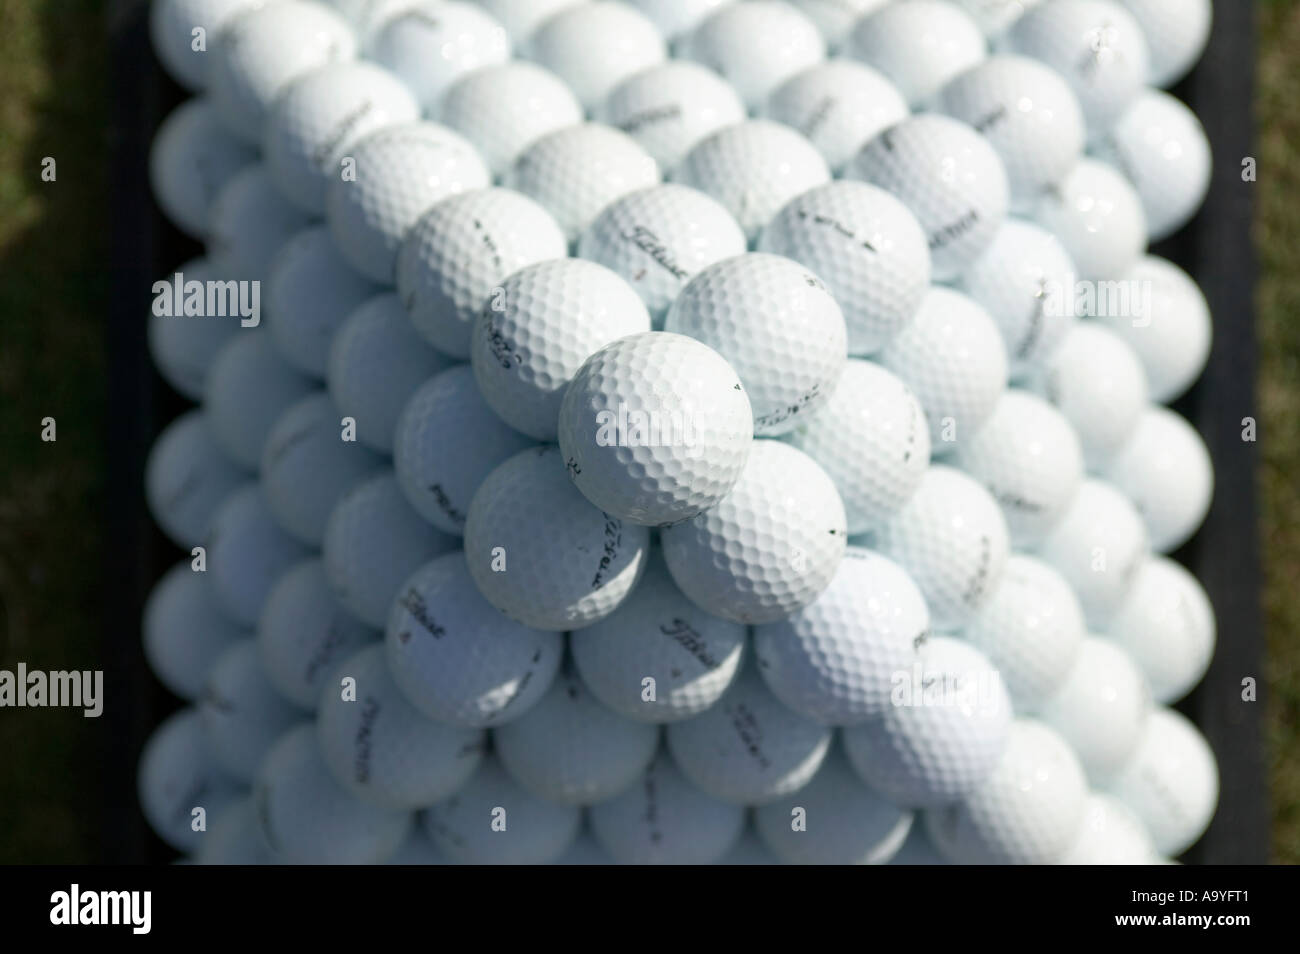 Golf balls set up in a pyramid on a practice range. Stock Photo